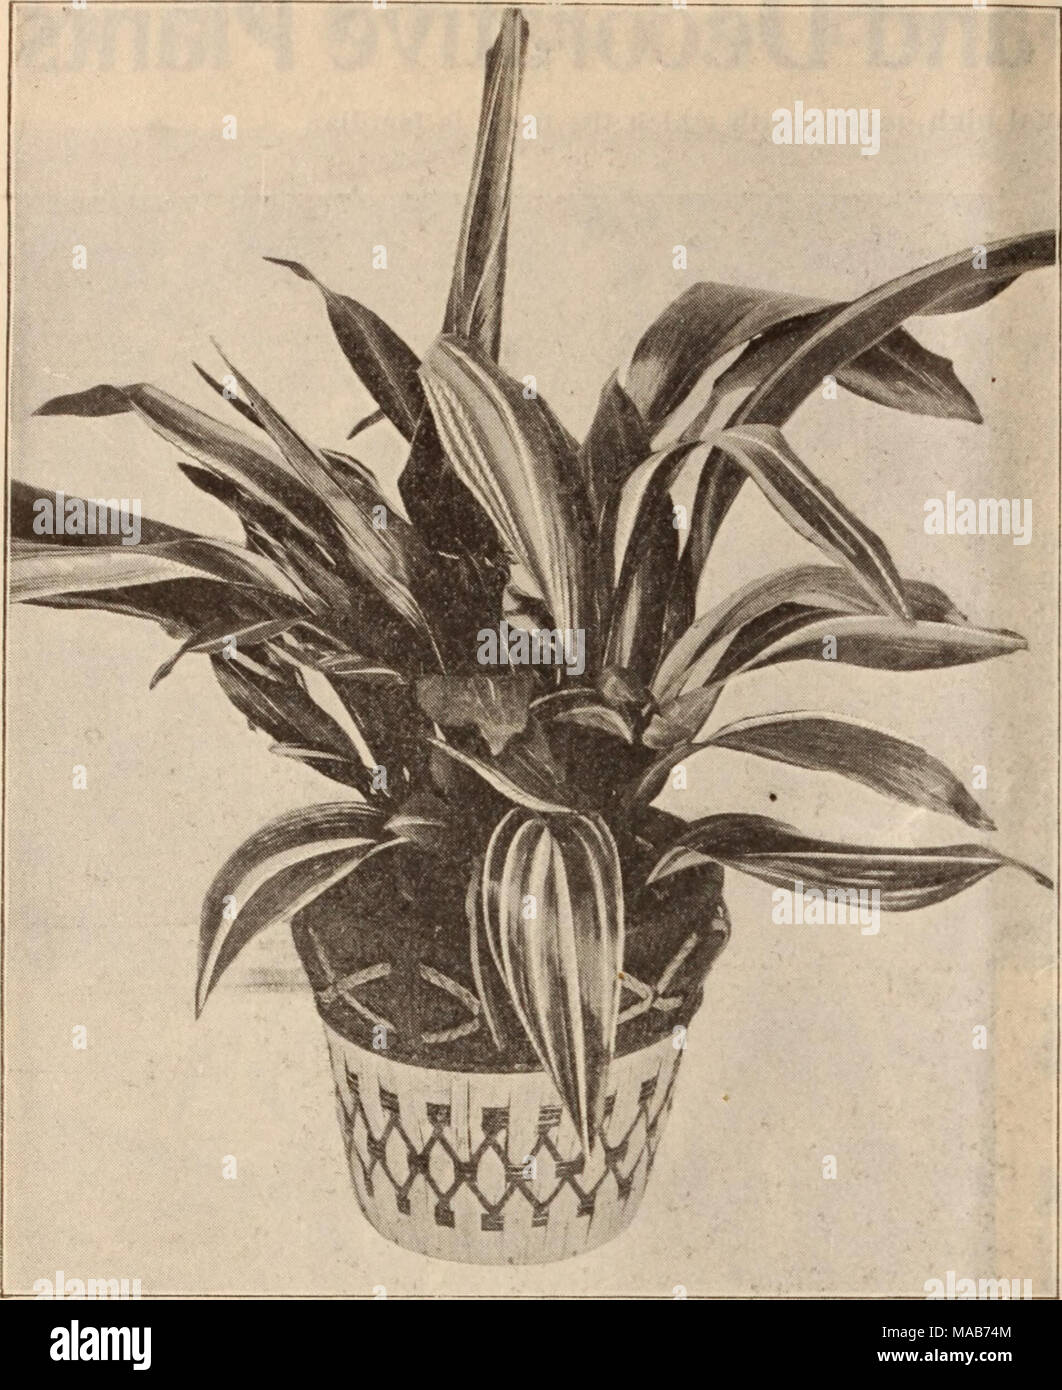 . Dreer's wholesale price list / Henry A. Dreer. . ASPIDISTRA LURIDA VARIEGATA Ardisia Crenulata. A fine lot of thrifty young plants. 2-inch pots, $0.85 per doz.; $6.00 per 100; $50 00 per 1000. 4 &quot; 3.00 &quot; 20.00 &quot; 175.00 Asclepias Lanceolata. A very dainty white-flowered form of the milk-weed, growing about 18 inches high, in flower almost always. 2'/4-inch pots, $1.00 per doz.; $7.00 per 100. Stock Photo